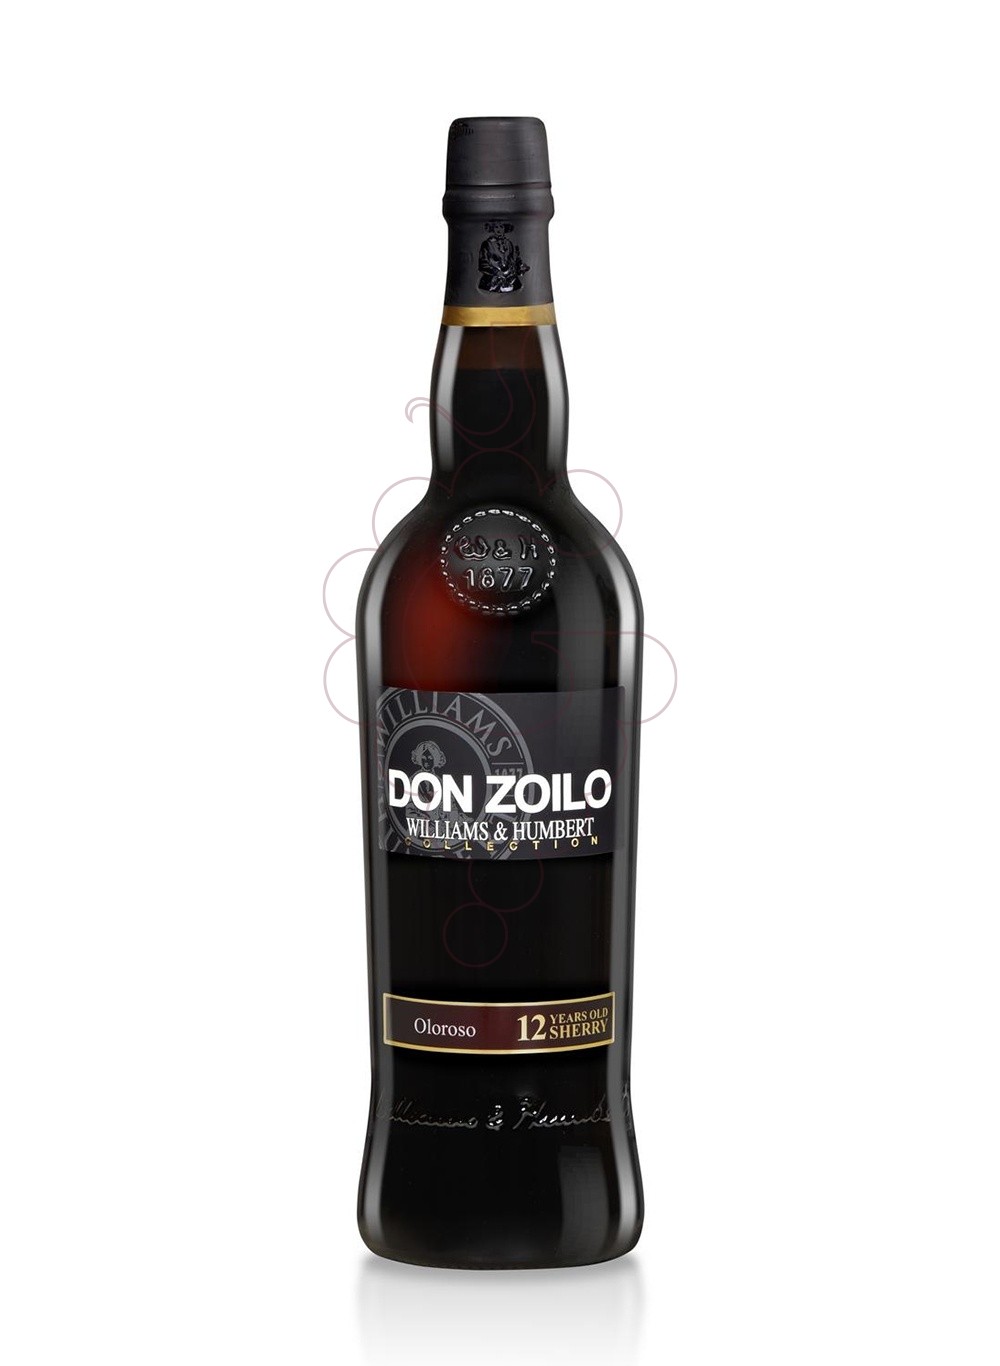 Photo Don zoilo oloroso 12 anys fortified wine